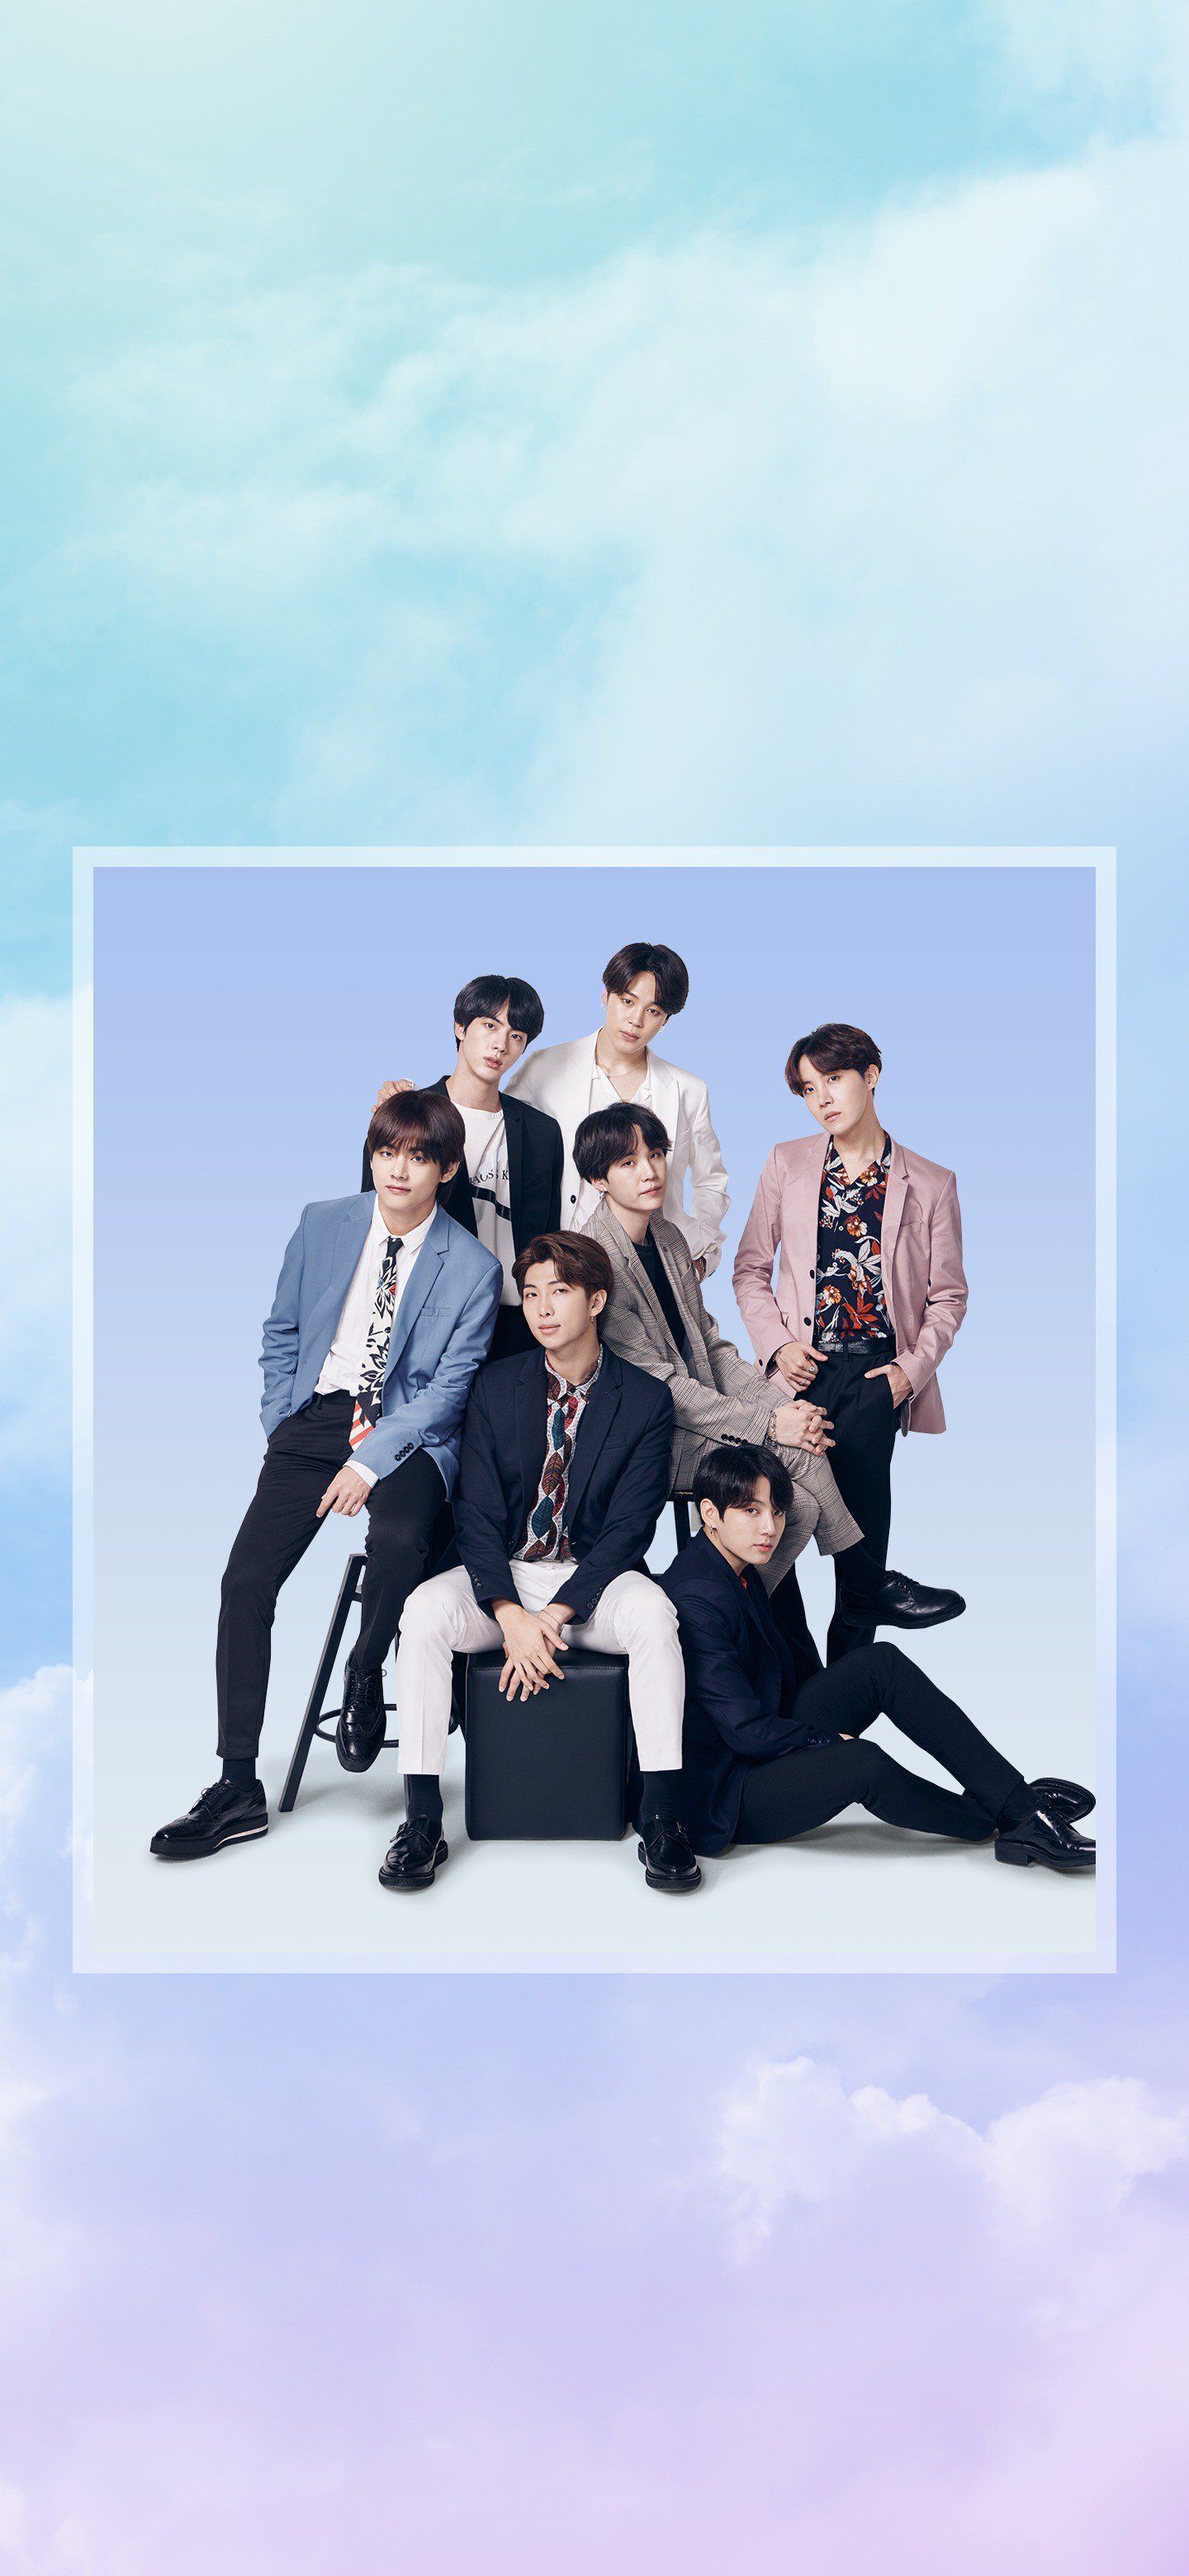 Bts Life Goes On Wallpapers